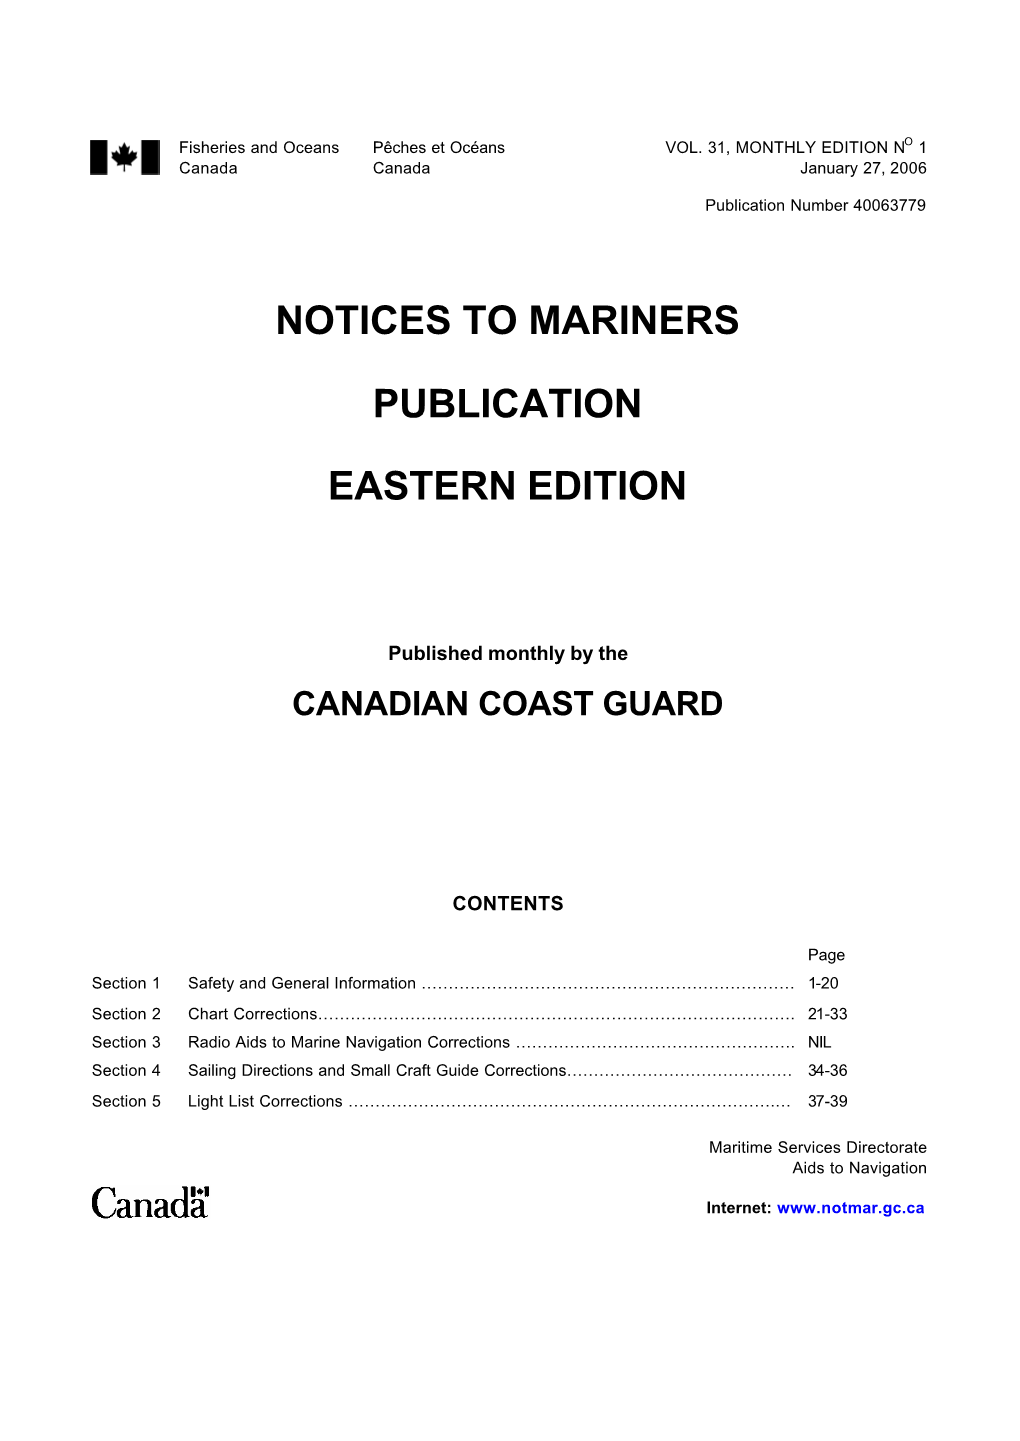 Notices to Mariners Publication Eastern Edition